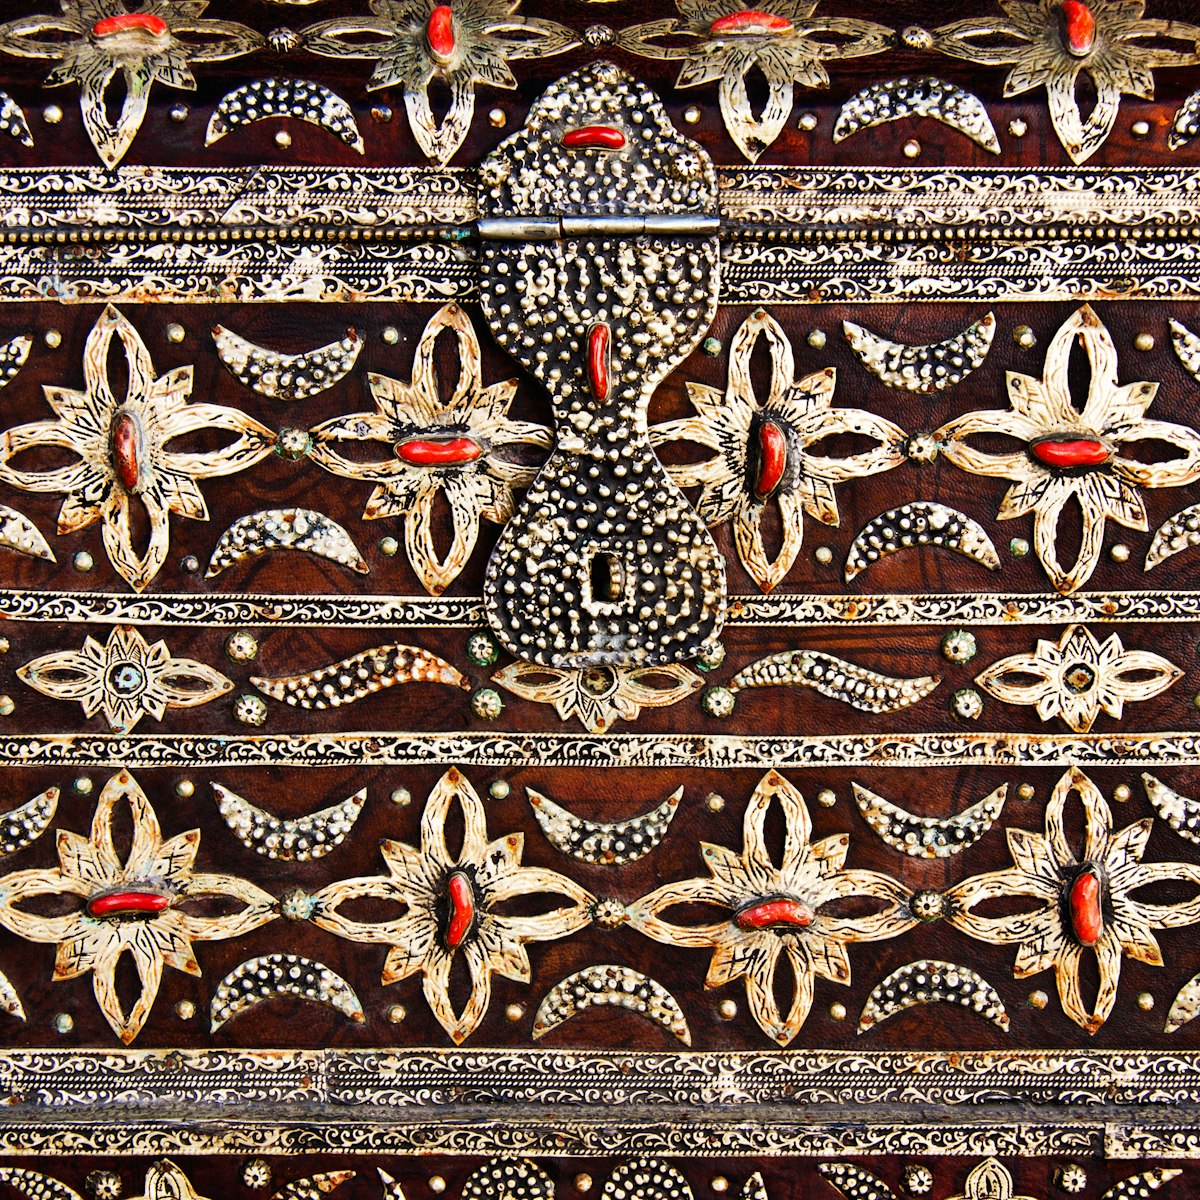 Detail from the traditional arabic jewellery box.; Shutterstock ID 151427267; Your name (First / Last): Josh Vogel; Project no. or GL code: 56530; Network activity no. or Cost Centre: Online-Design; Product or Project: LP.com Destination Galleries